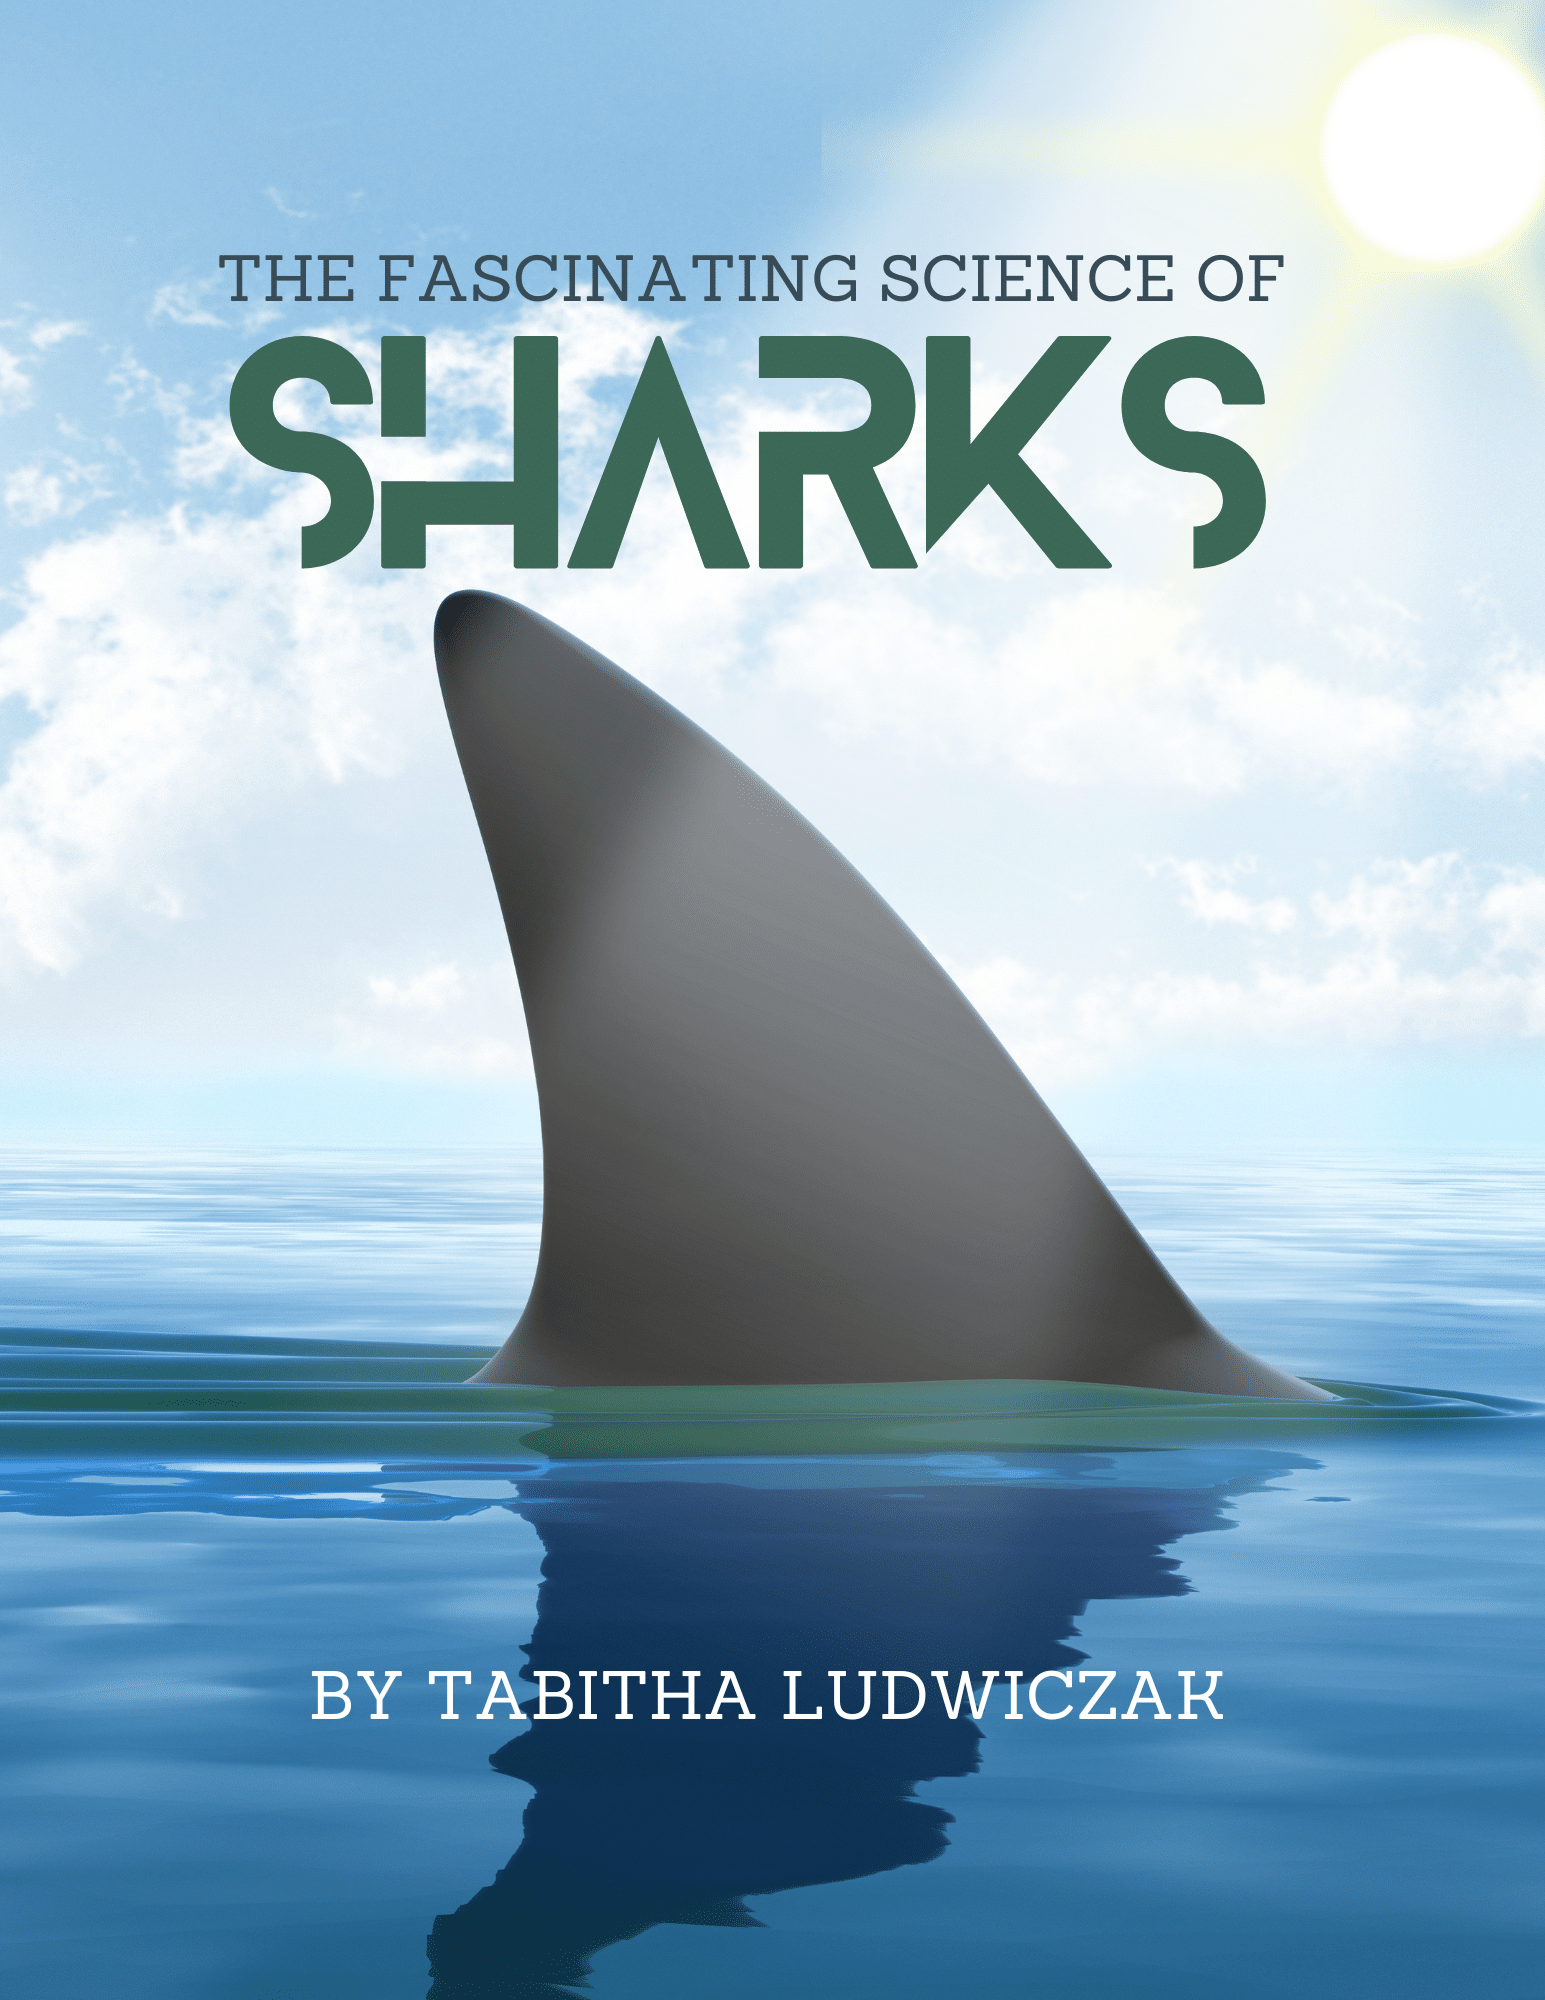 The Fascinating Science of Sharks FREE ebook